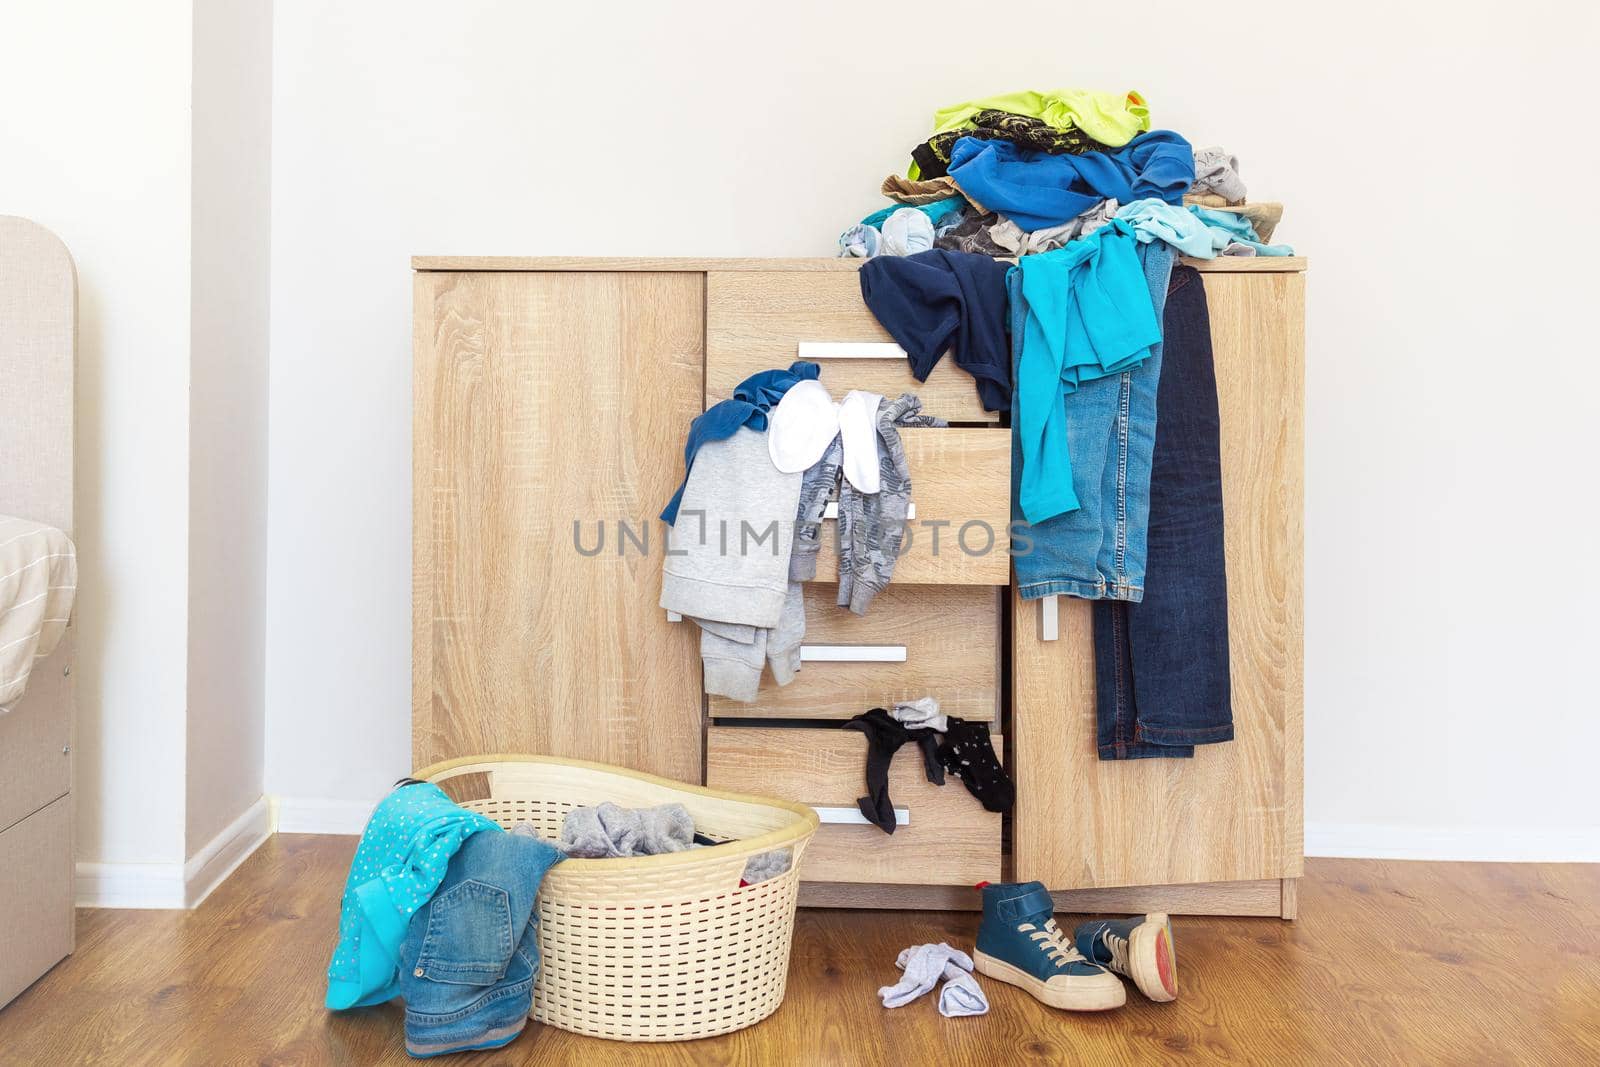 open drawers of wooden chest of drawers with clothes falling out and piles of things around in a mess. Things are laid out to send them to the laundry, wash, laundry basin. Light background copy-paste